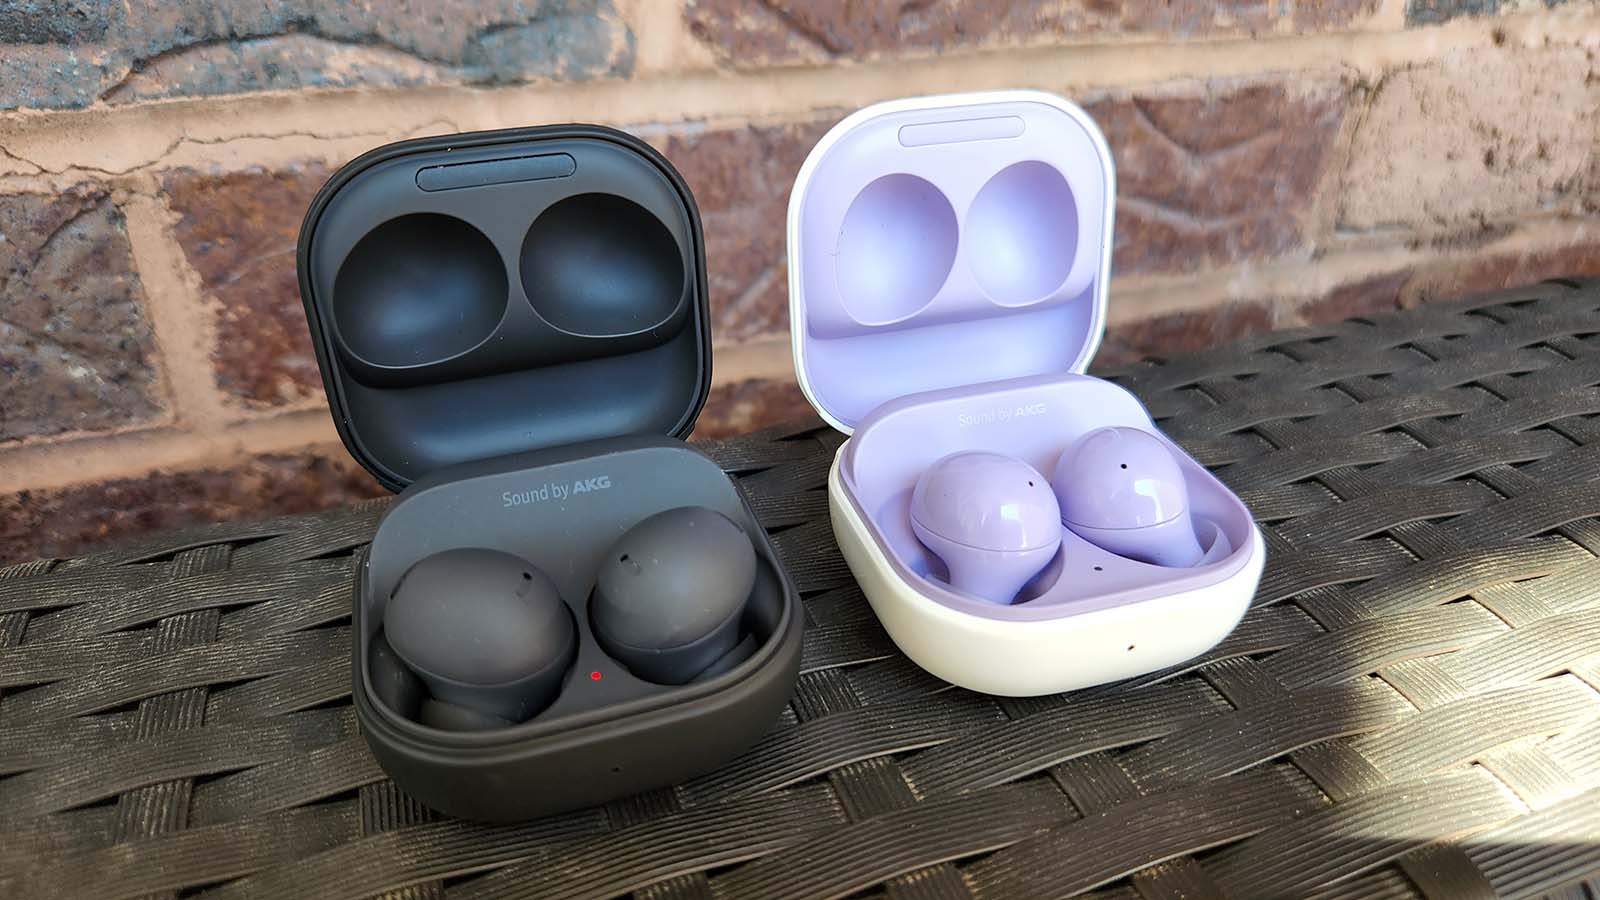 Samsung Galaxy Buds2 Pro Review: Is it a worthy upgrade?